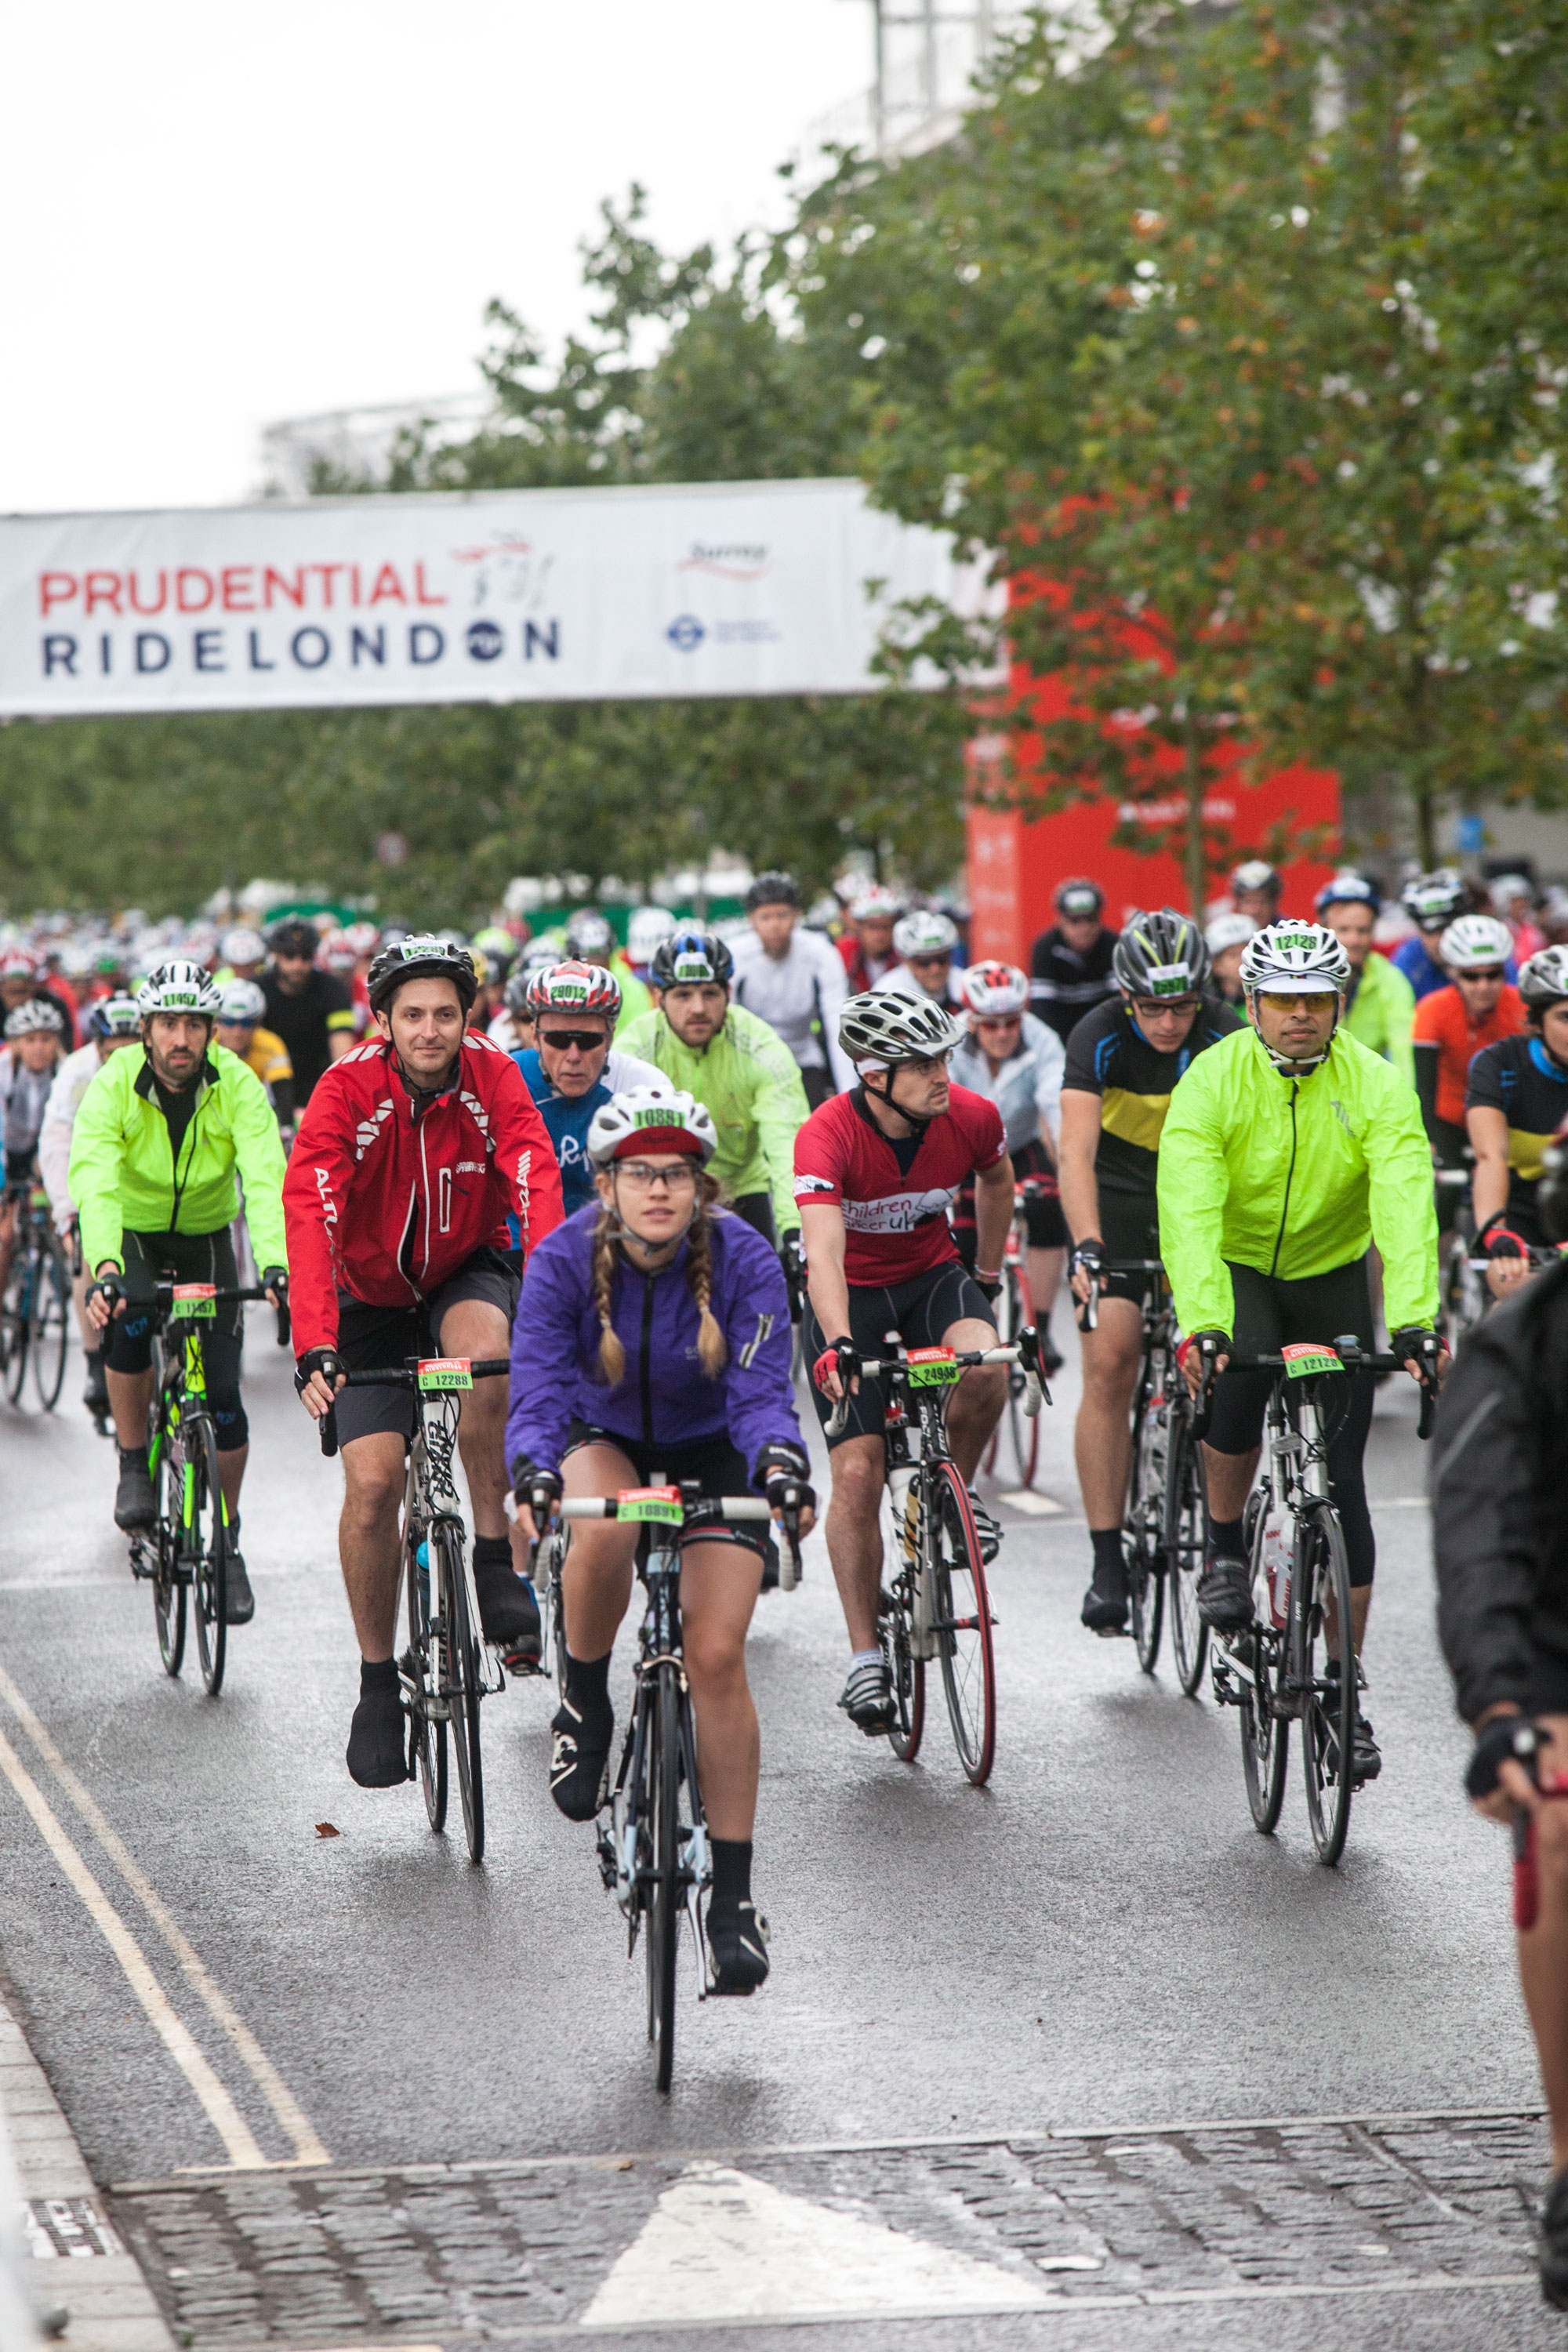 Weary cyclists on the RideLondon 2014